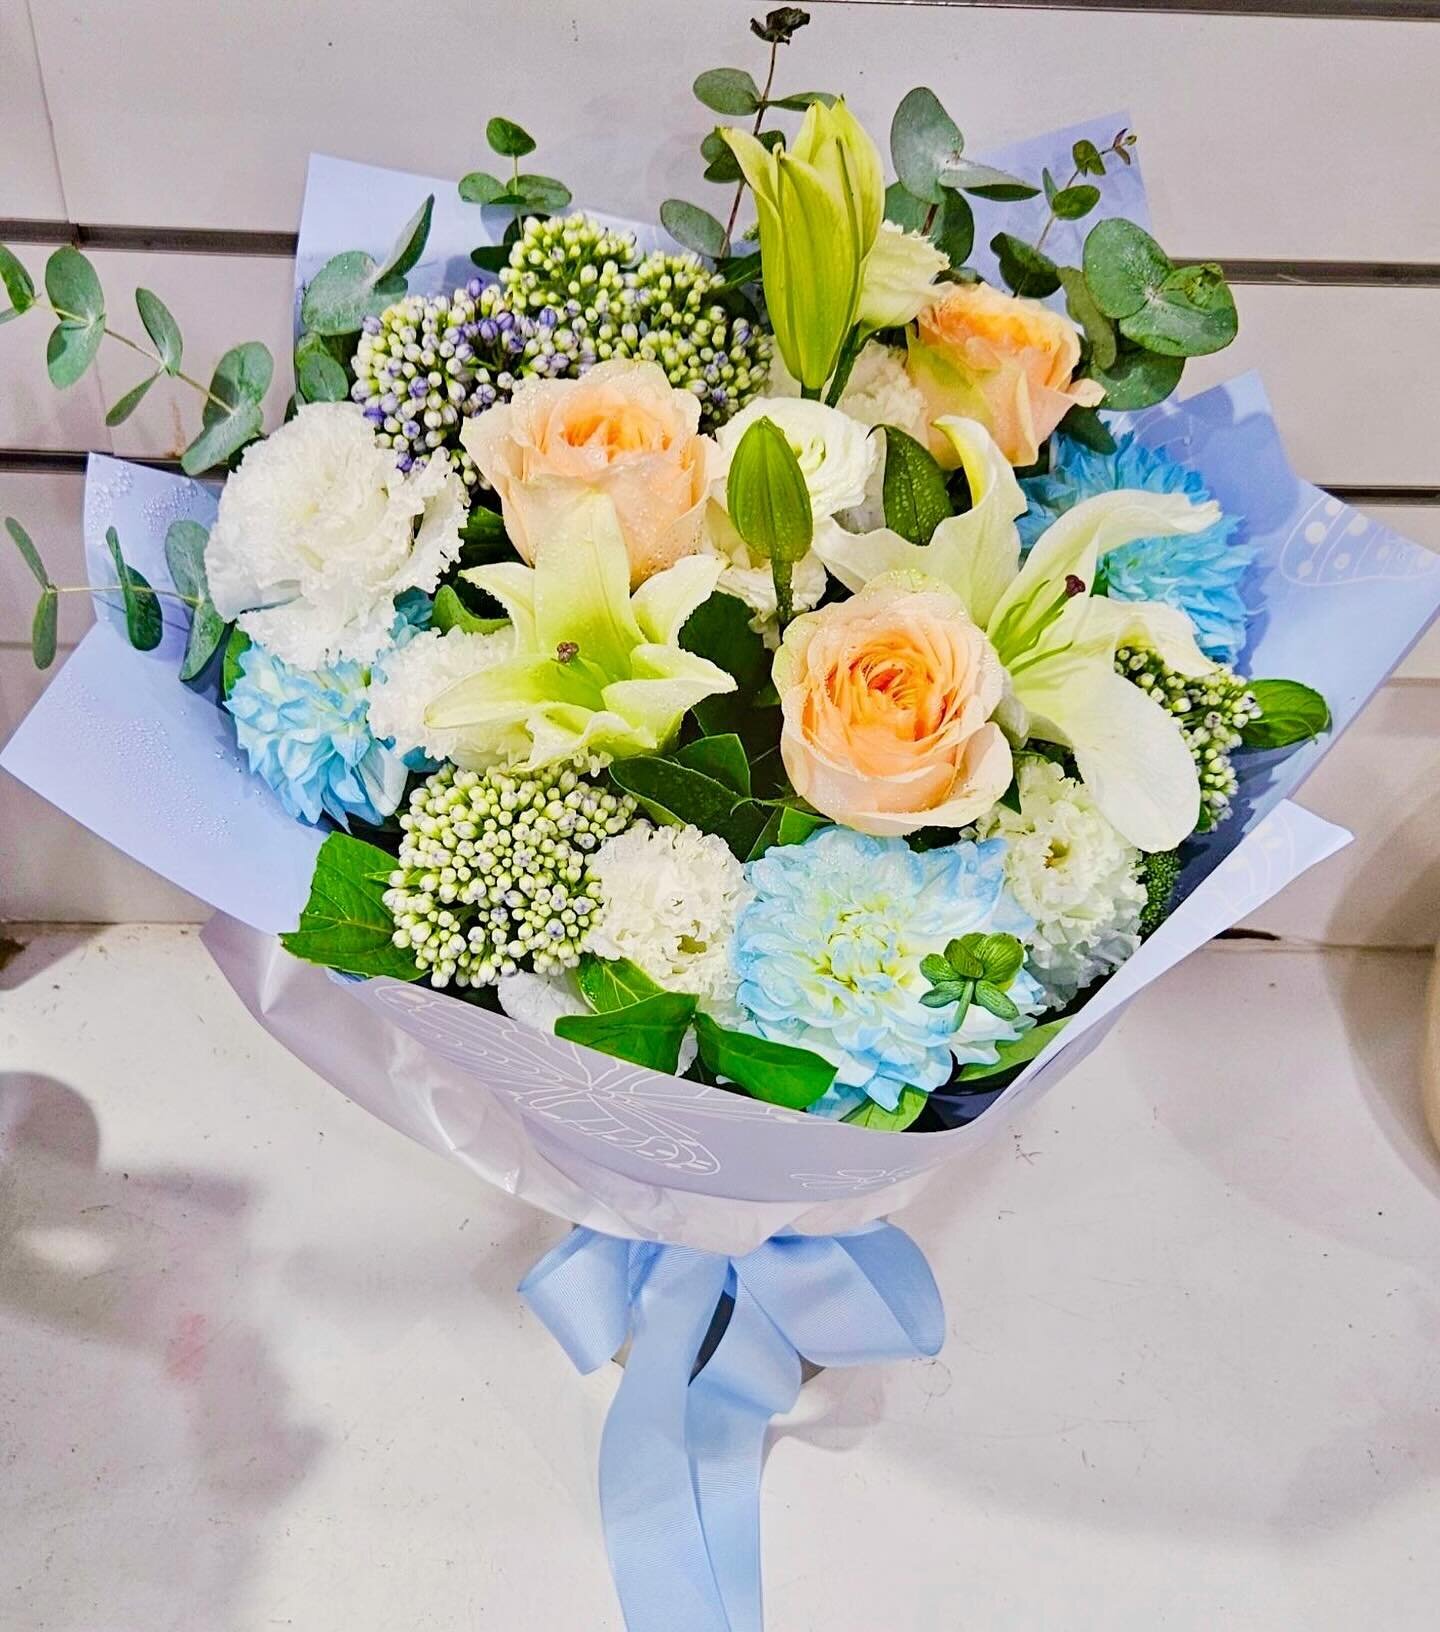 .
Feeling the vibrant energy of blue and orange hues today! 💙🧡

This stunning bouquet is like a burst of sunshine on a cloudy day. Perfect for adding a pop of color to any space.

#B072

#freshflowers #colourfulflowers #colourfulbouquet #florist #f